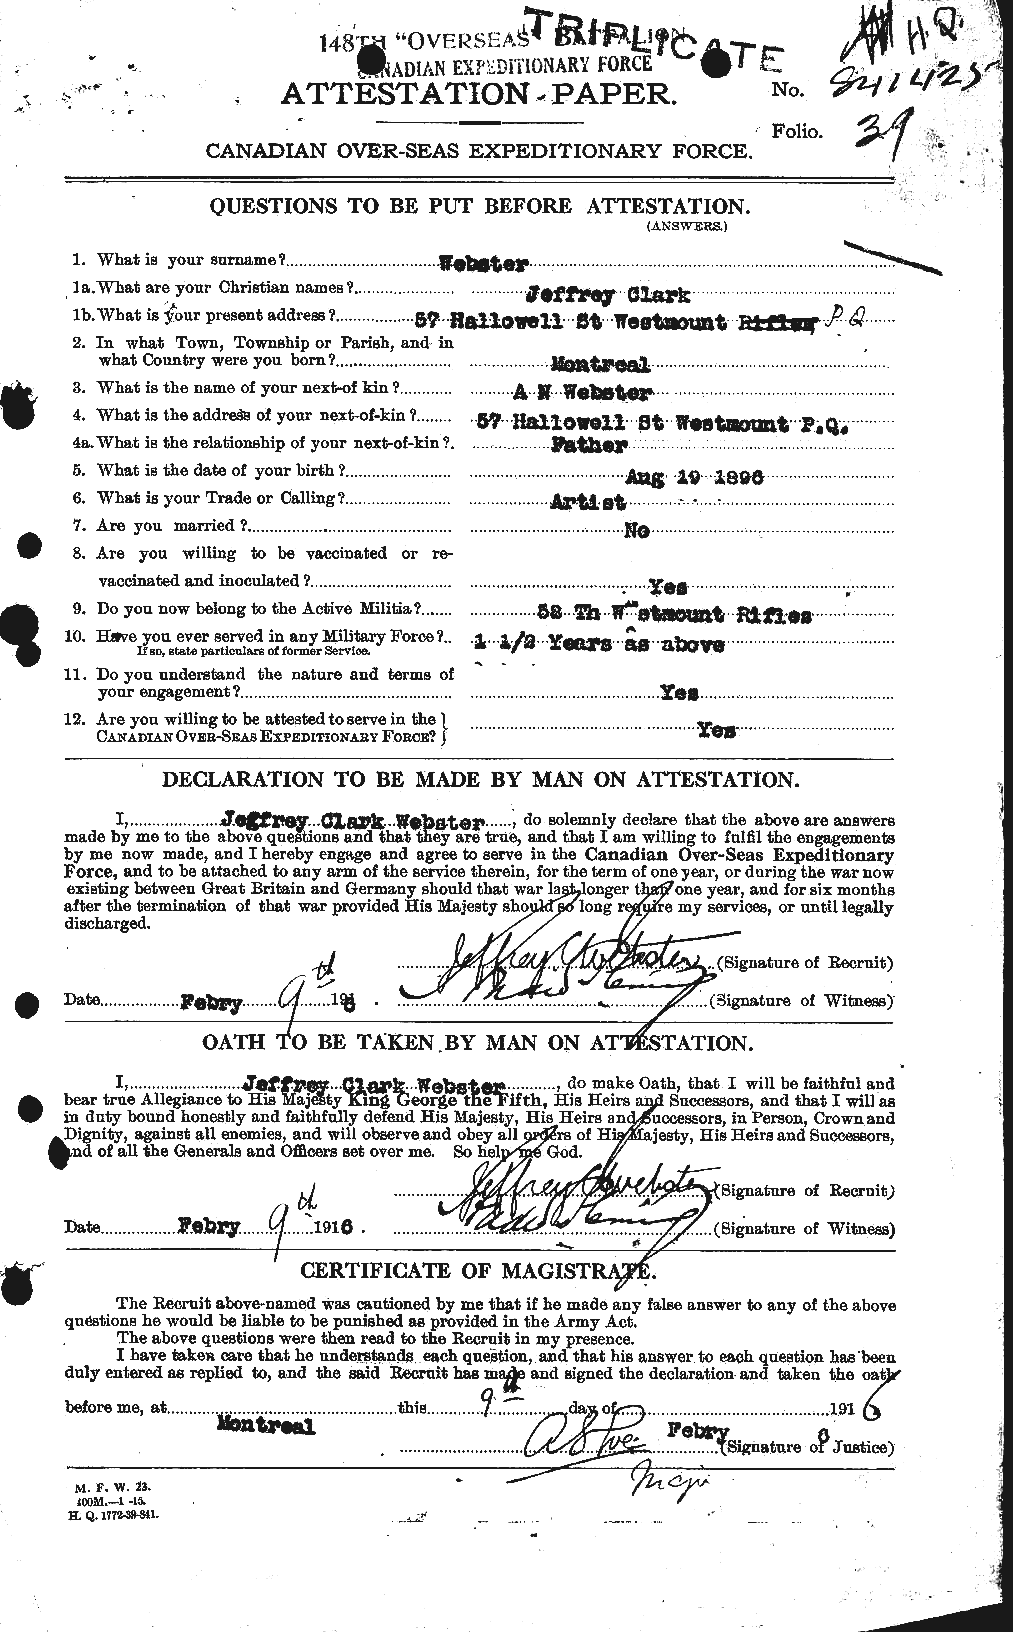 Personnel Records of the First World War - CEF 670466a